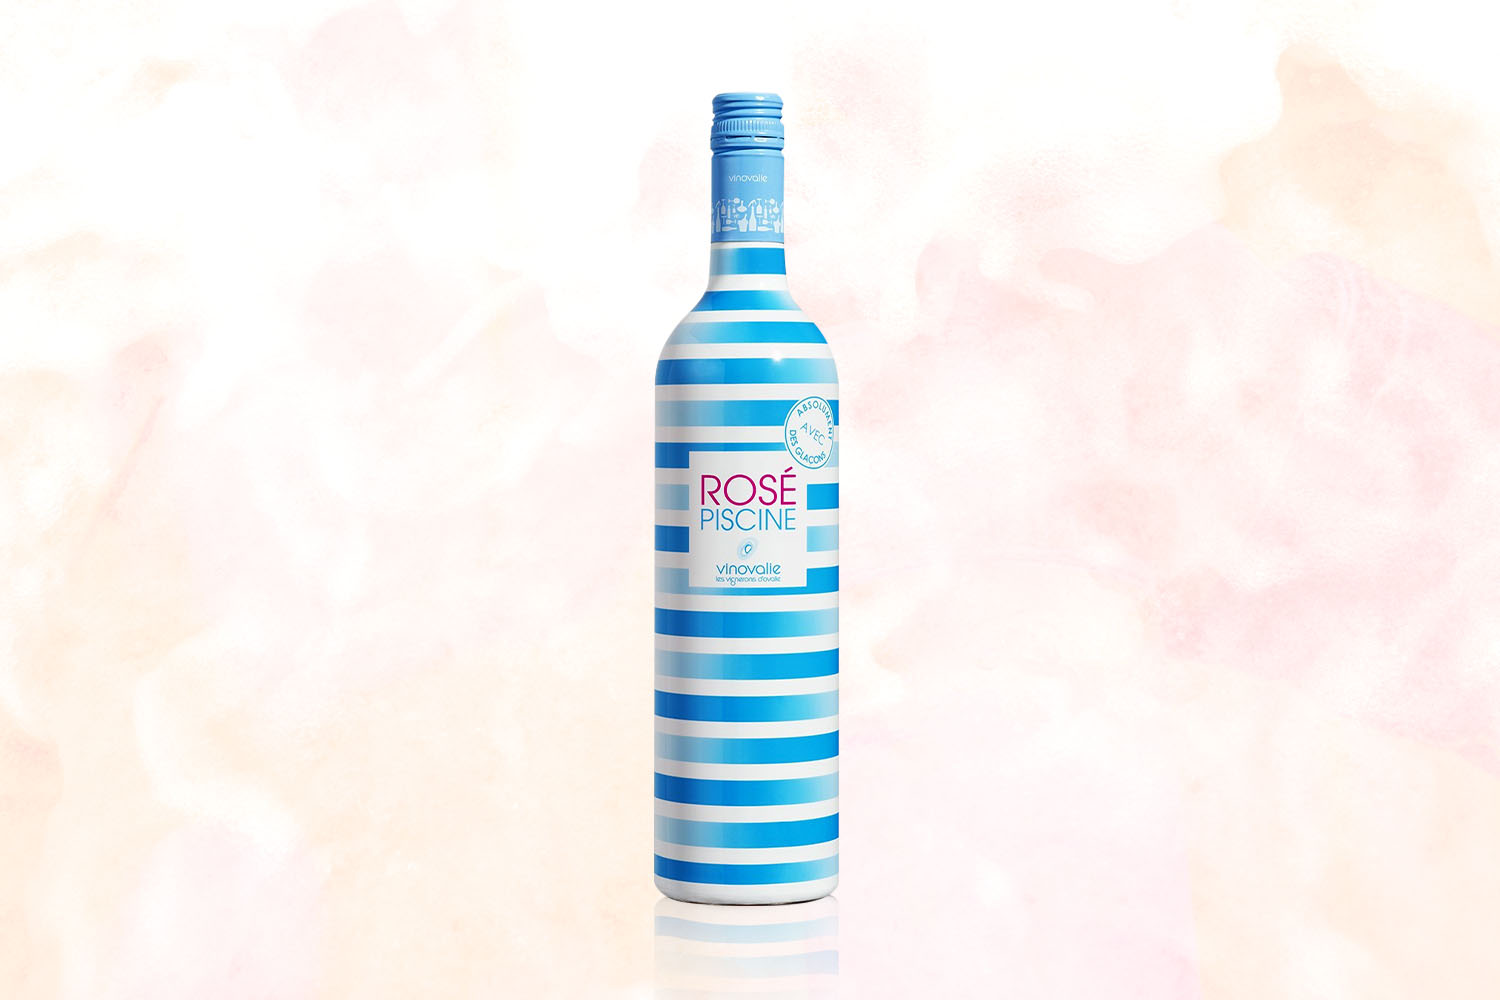 A bottle of Rose Piscine on a pale pink background